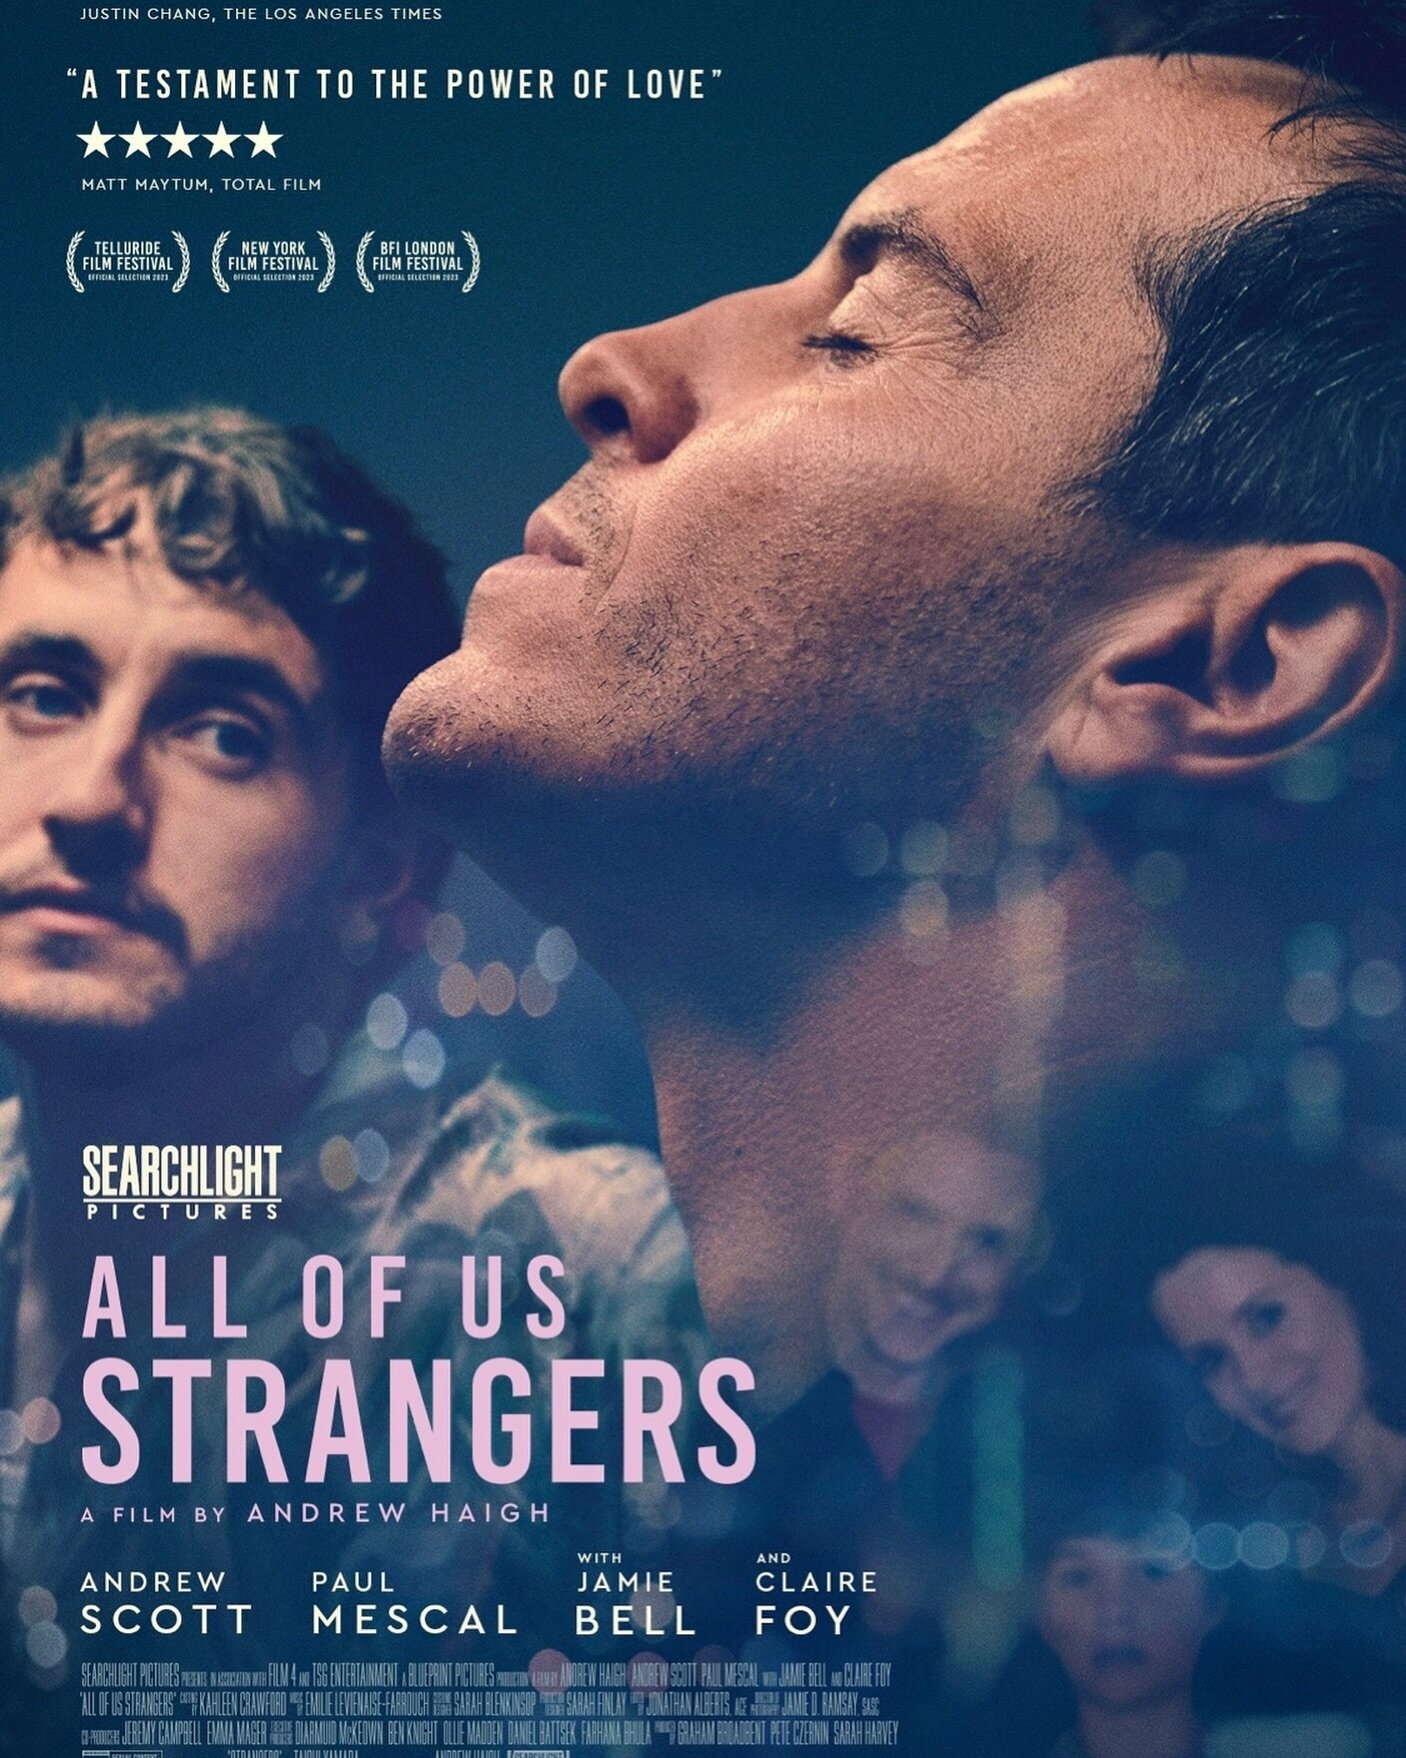 Just watched this movie #allofusstrangers and I am touched by how well it captures the #loneliness us #queer people often struggle with&hellip; the hunger for #acceptance and &lsquo;just&rsquo; to be seen for who you are (beyond queerness). 

Highly 